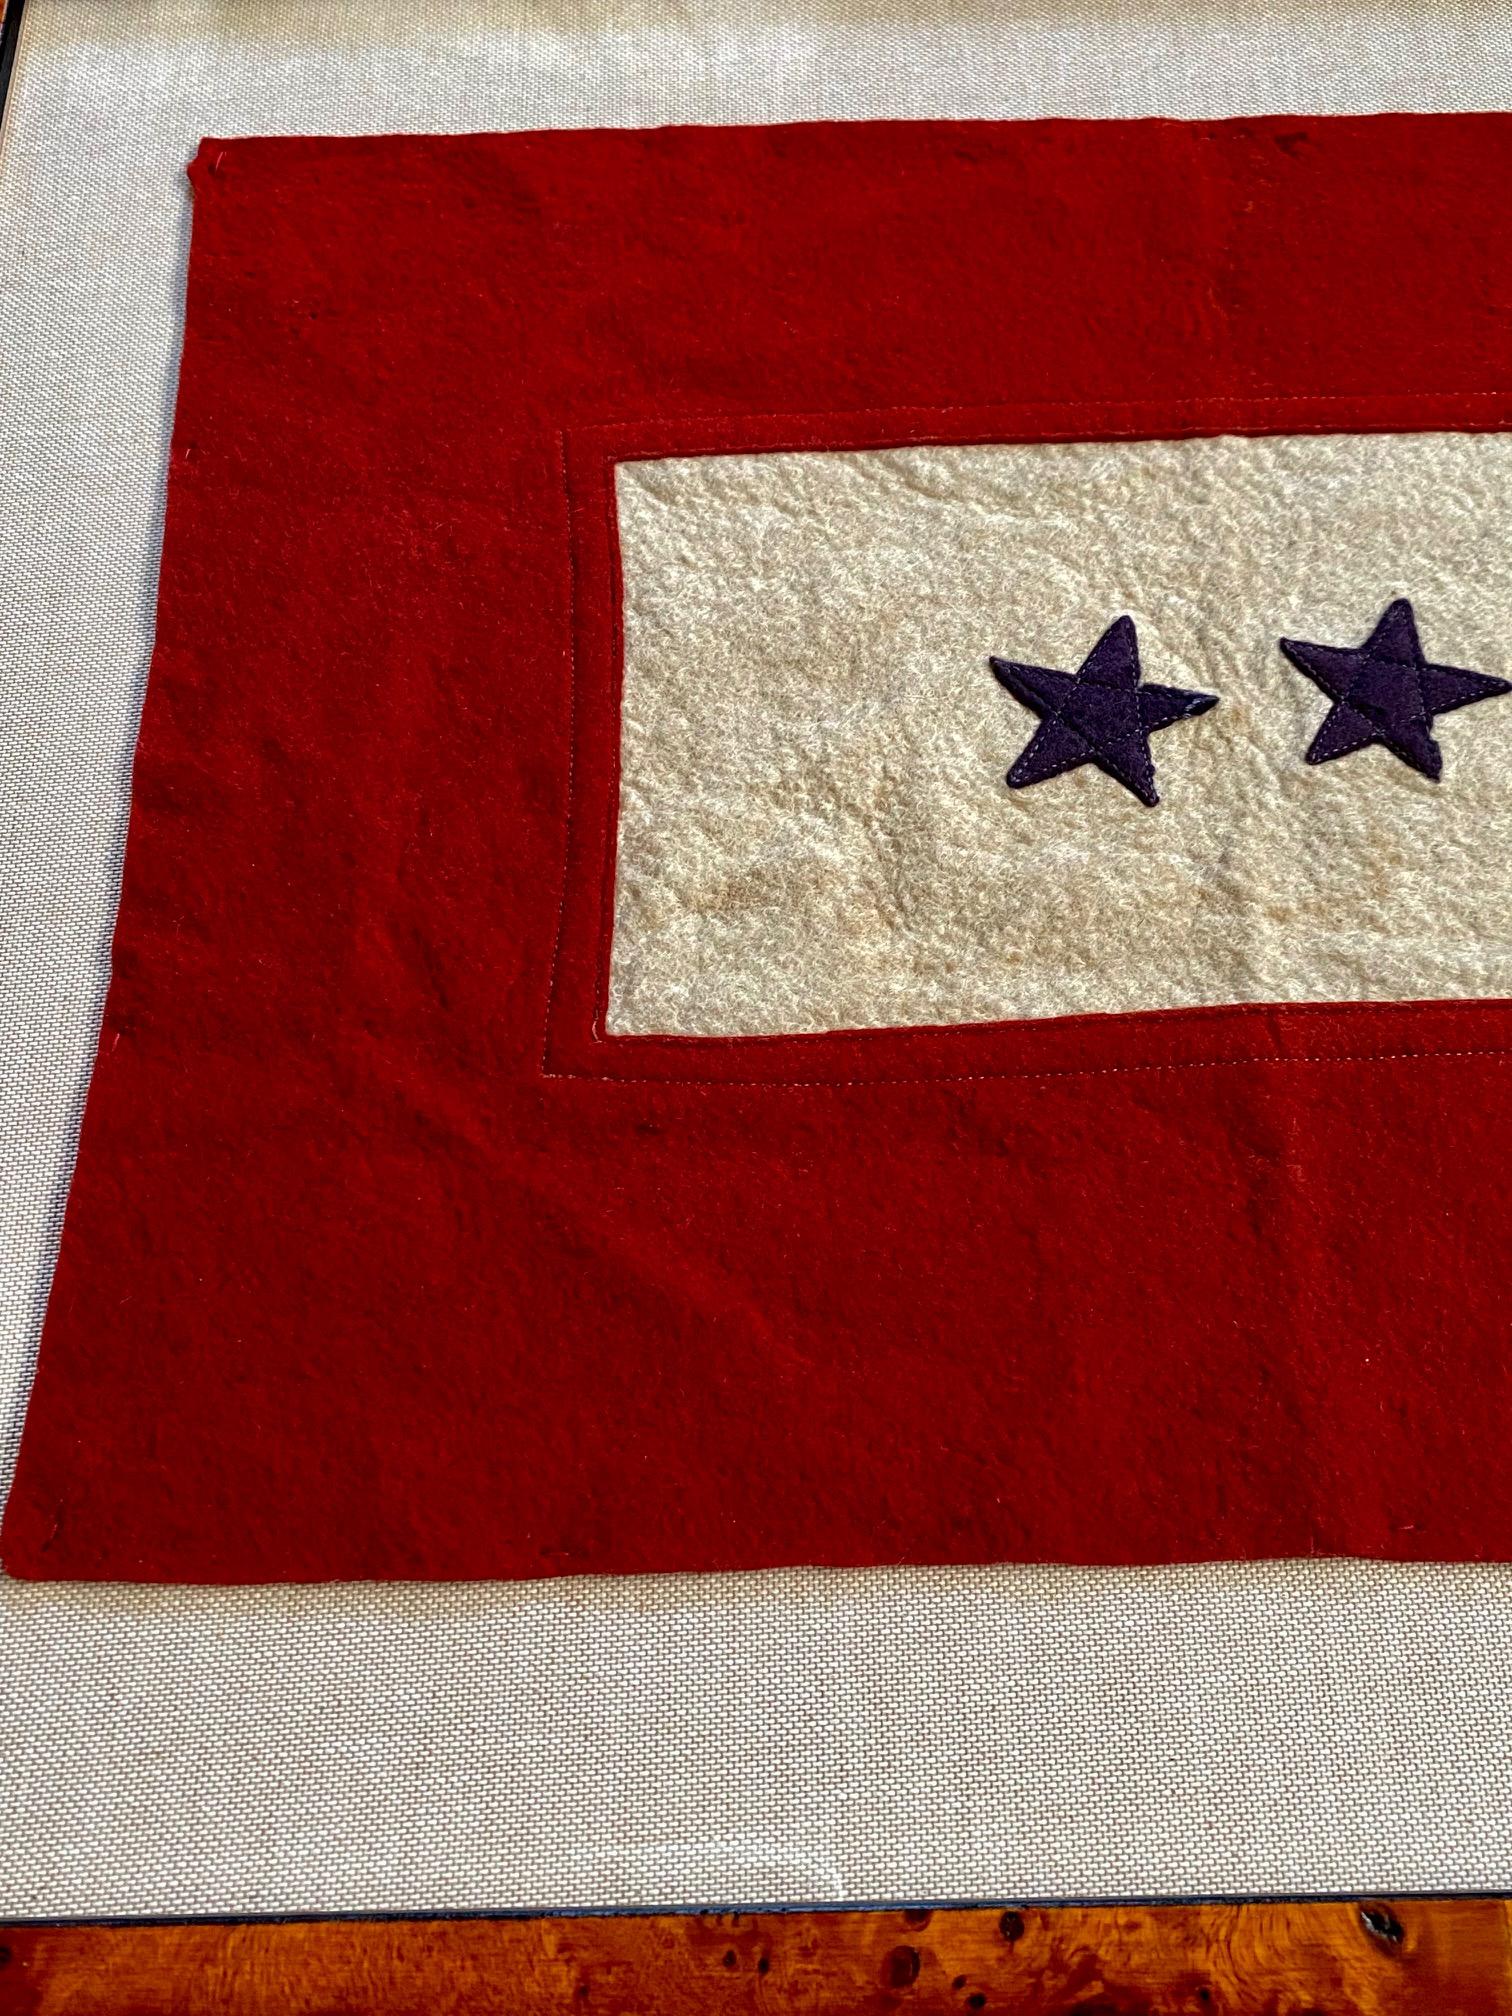 Antique historic American double blue star flag, circa 1917, a World War I flag honoring two family members in service. The flag is hand crafted of wool felt. It is structurally sound and in excellent condition, but does show its wonderful age in